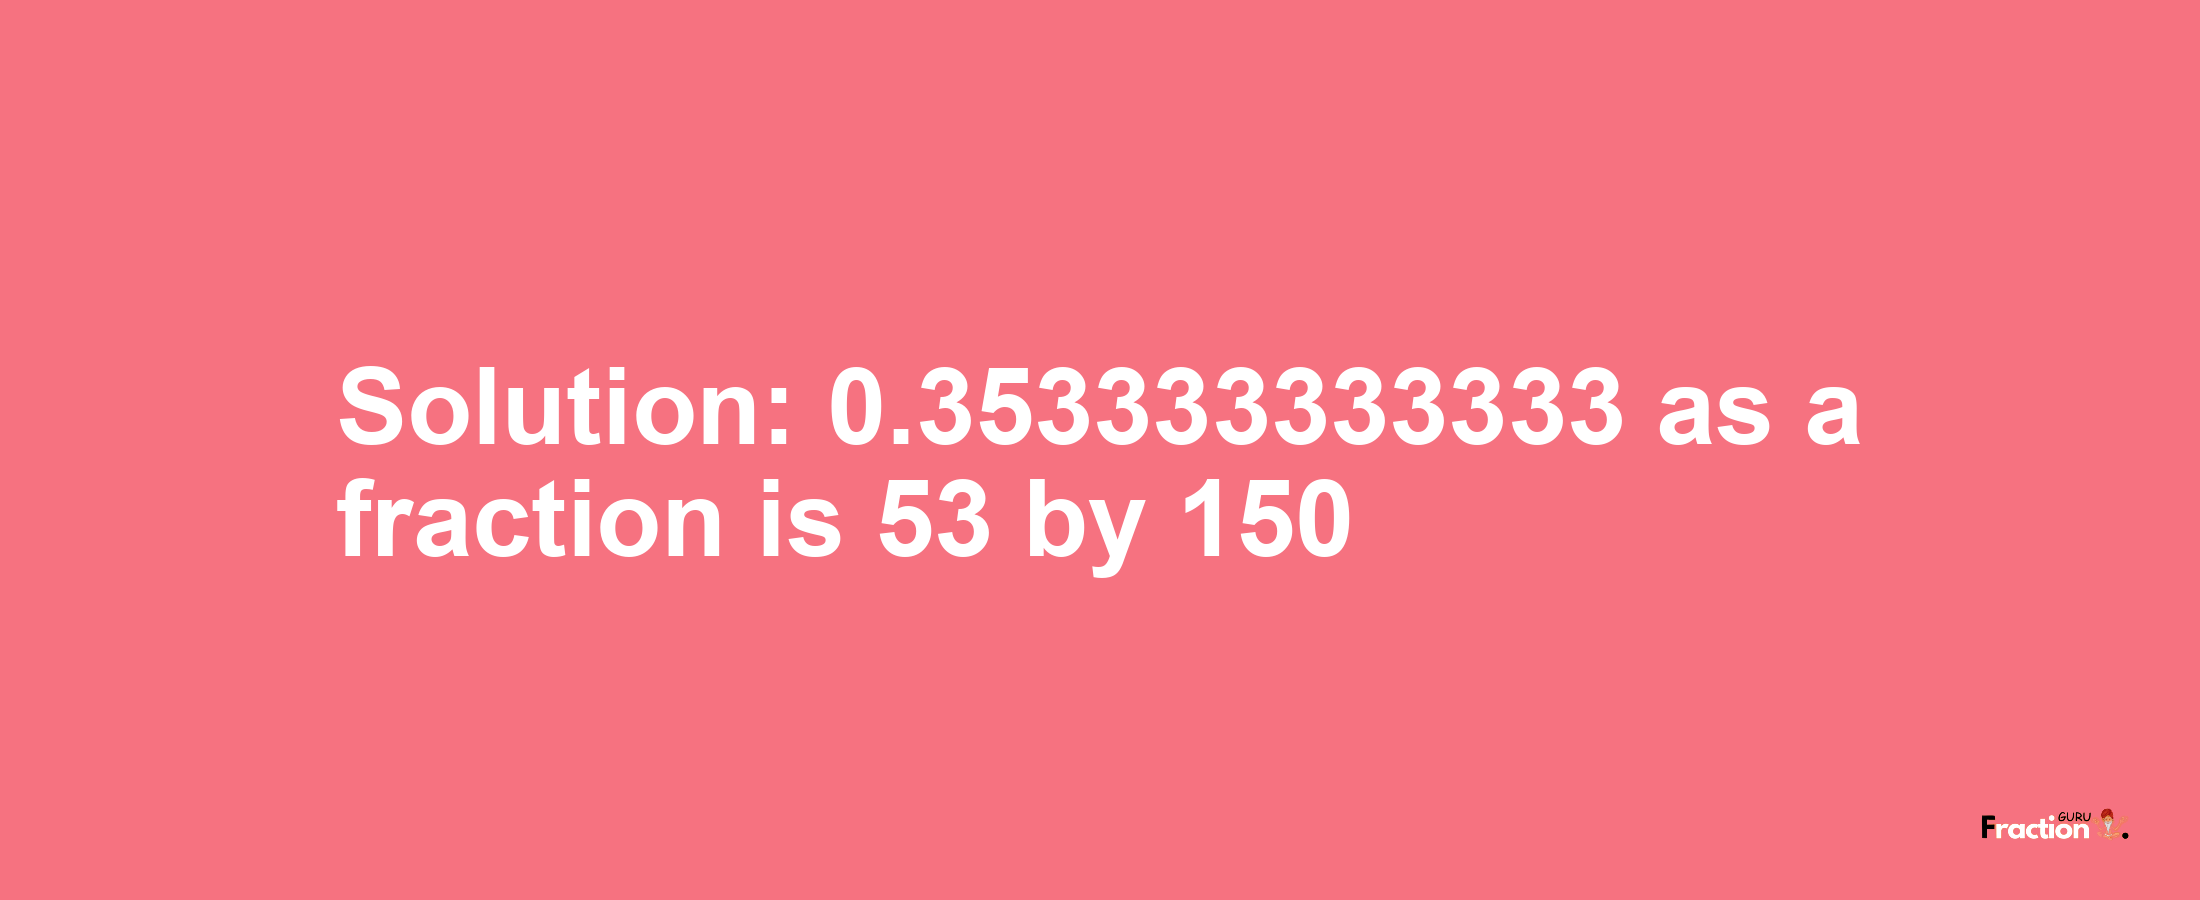 Solution:0.353333333333 as a fraction is 53/150